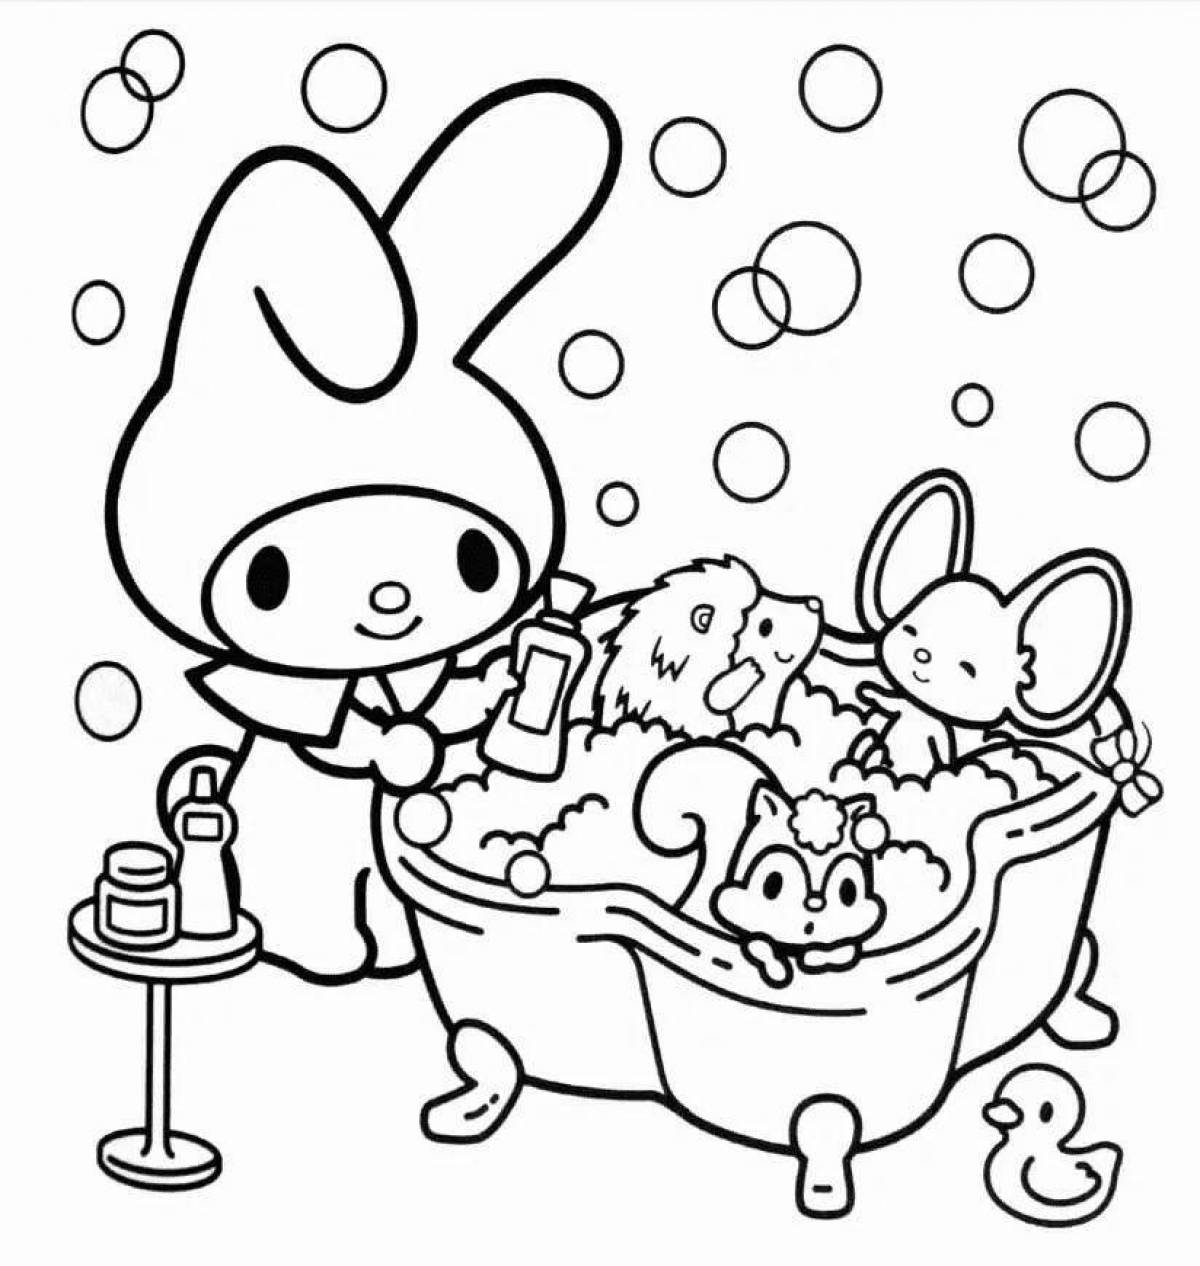 Shine coloring page melody